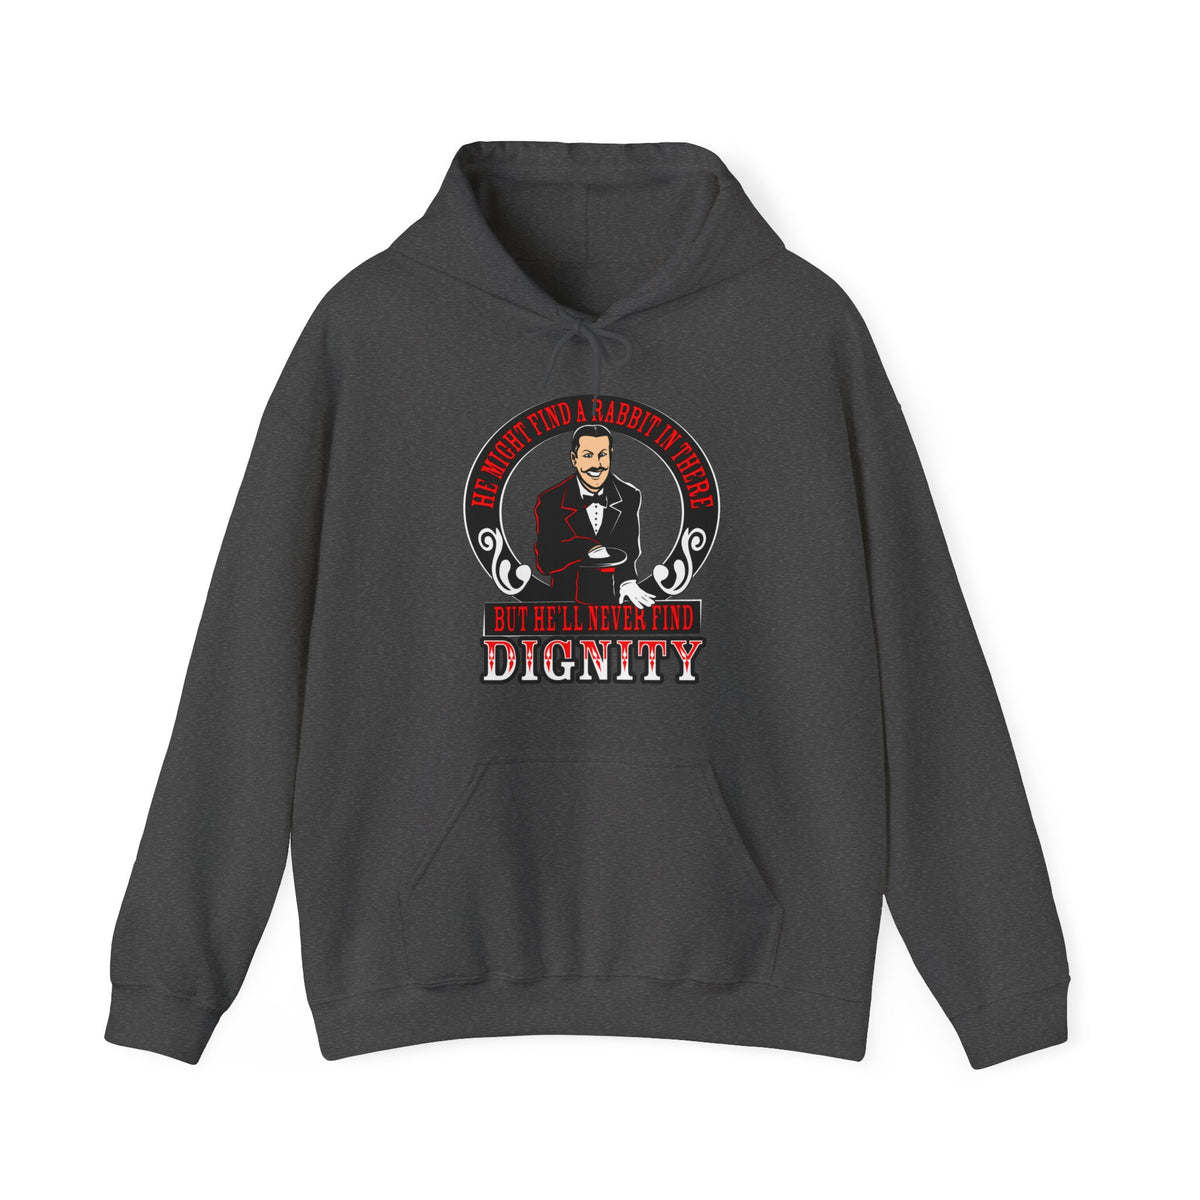 He Might Find A Rabbit In There - But He'll Never Find Dignity - Hoodie